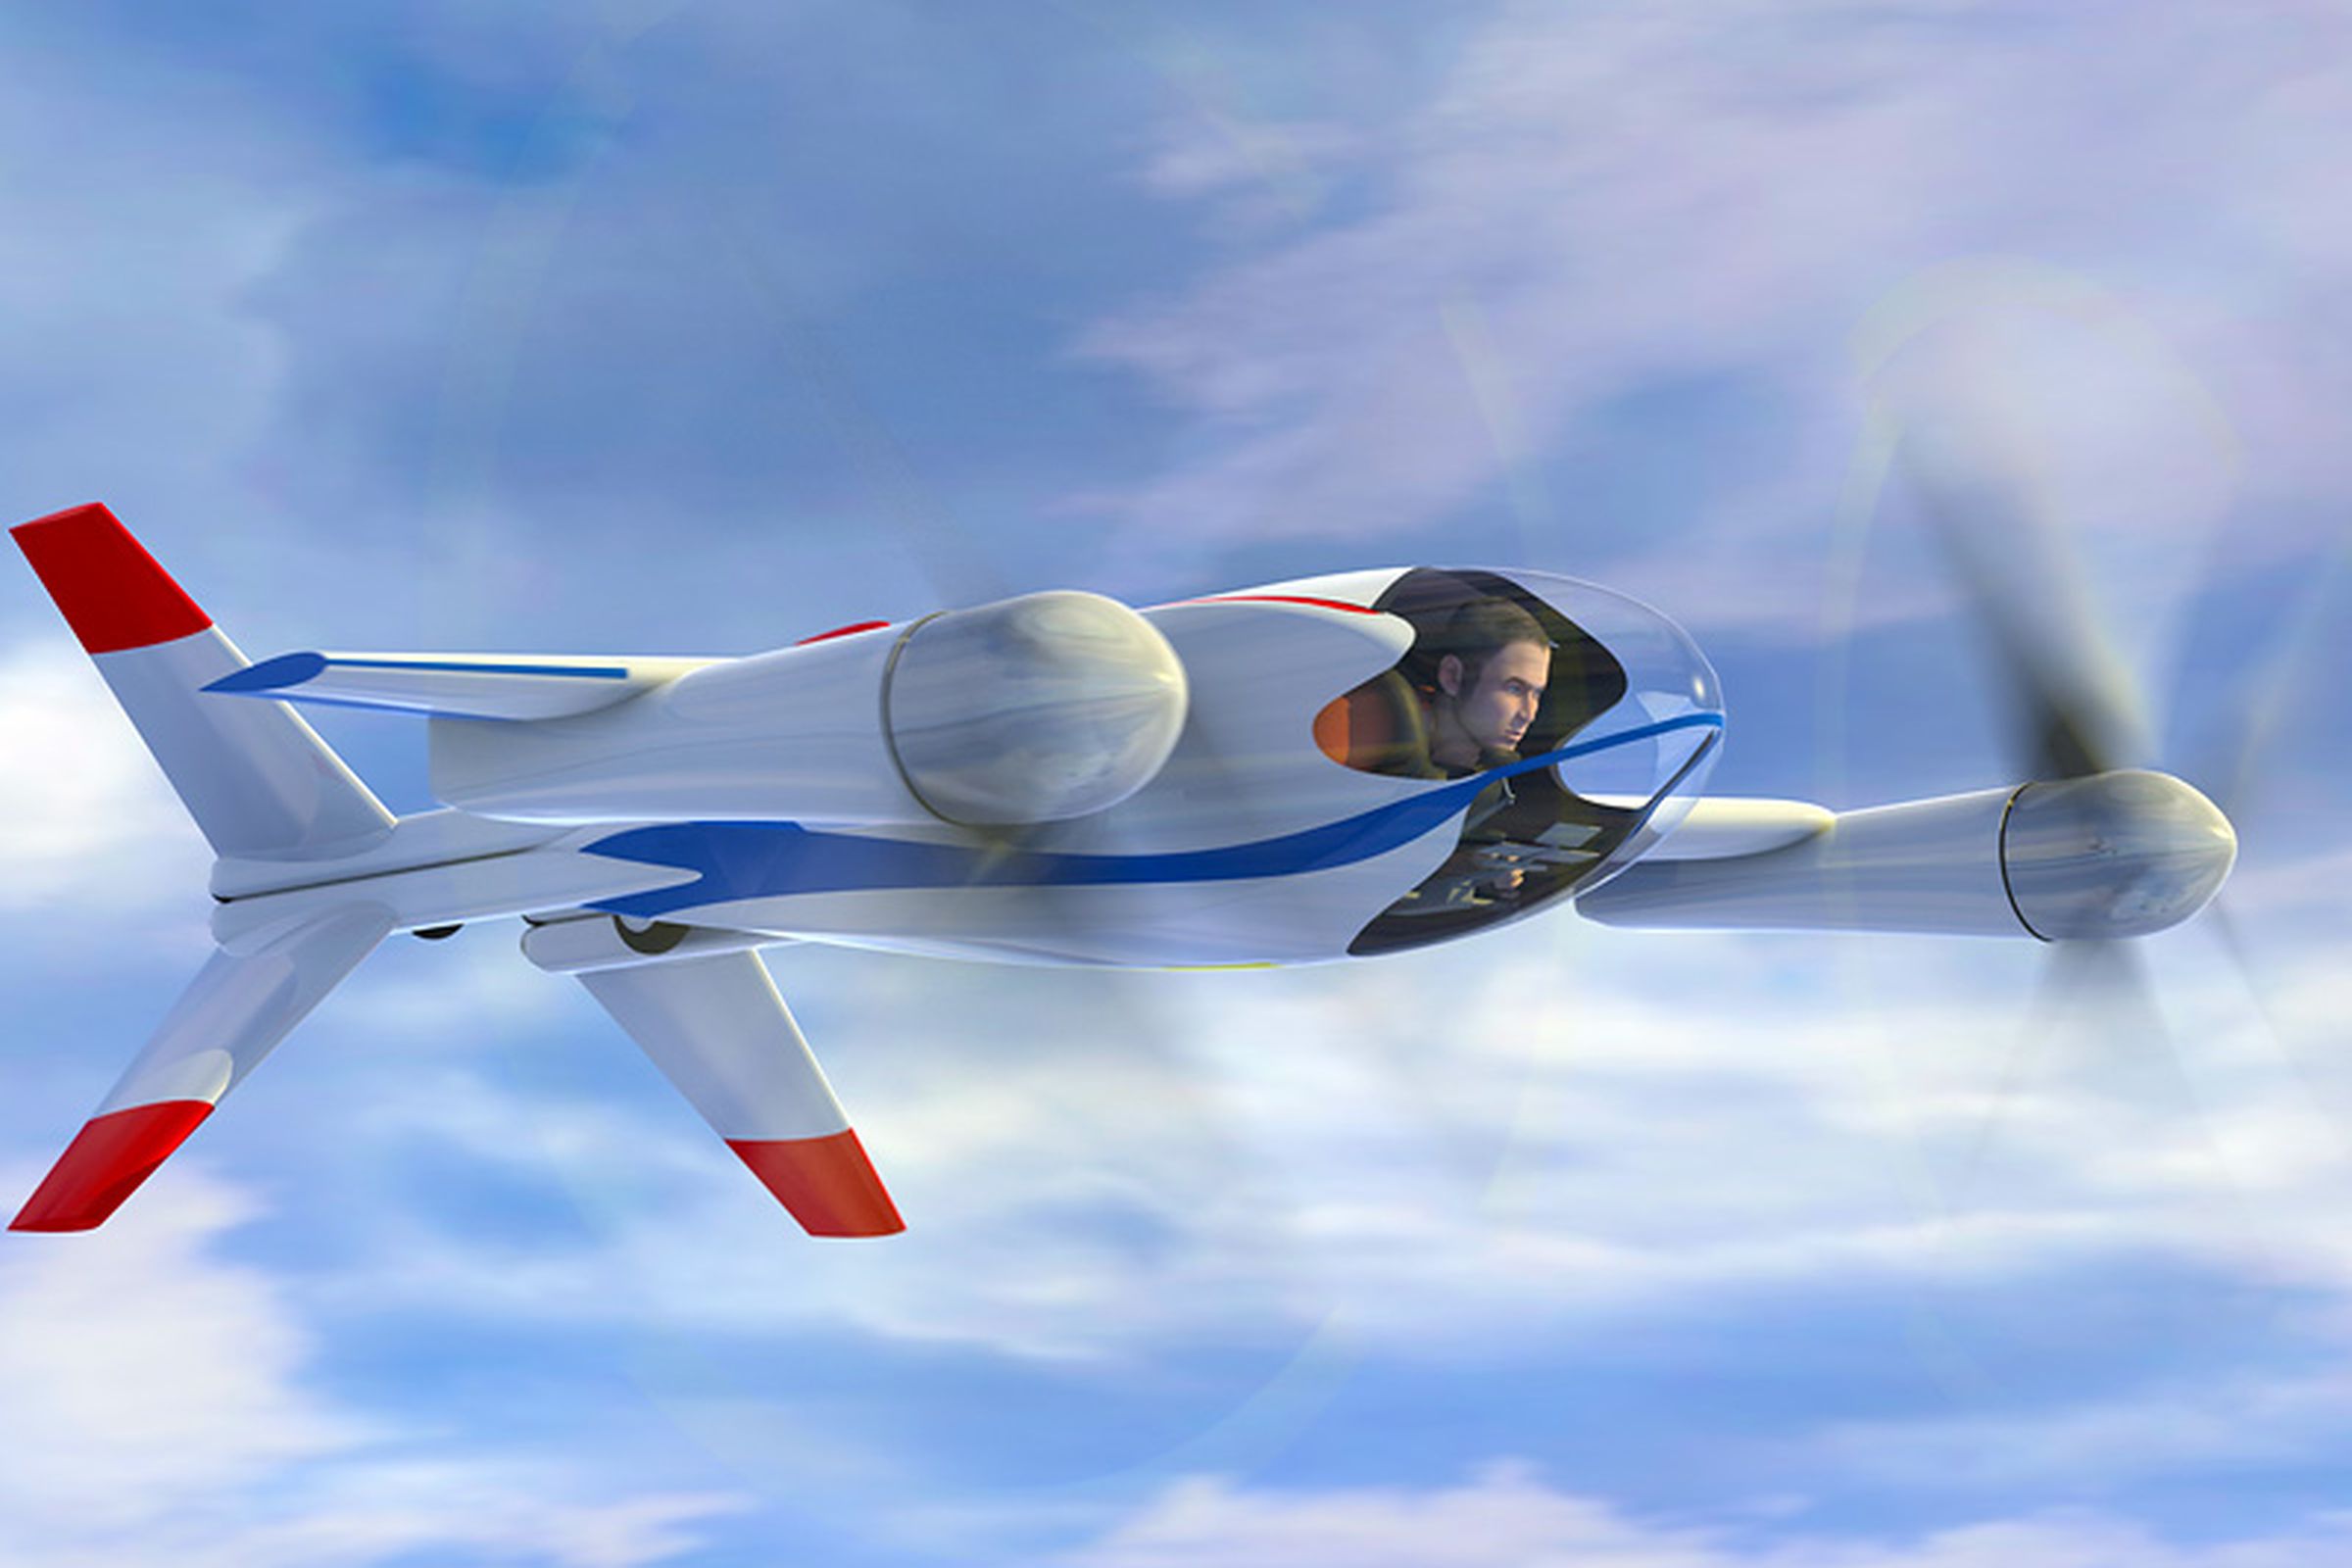 NASA’s Puffin Electric Tailsitter